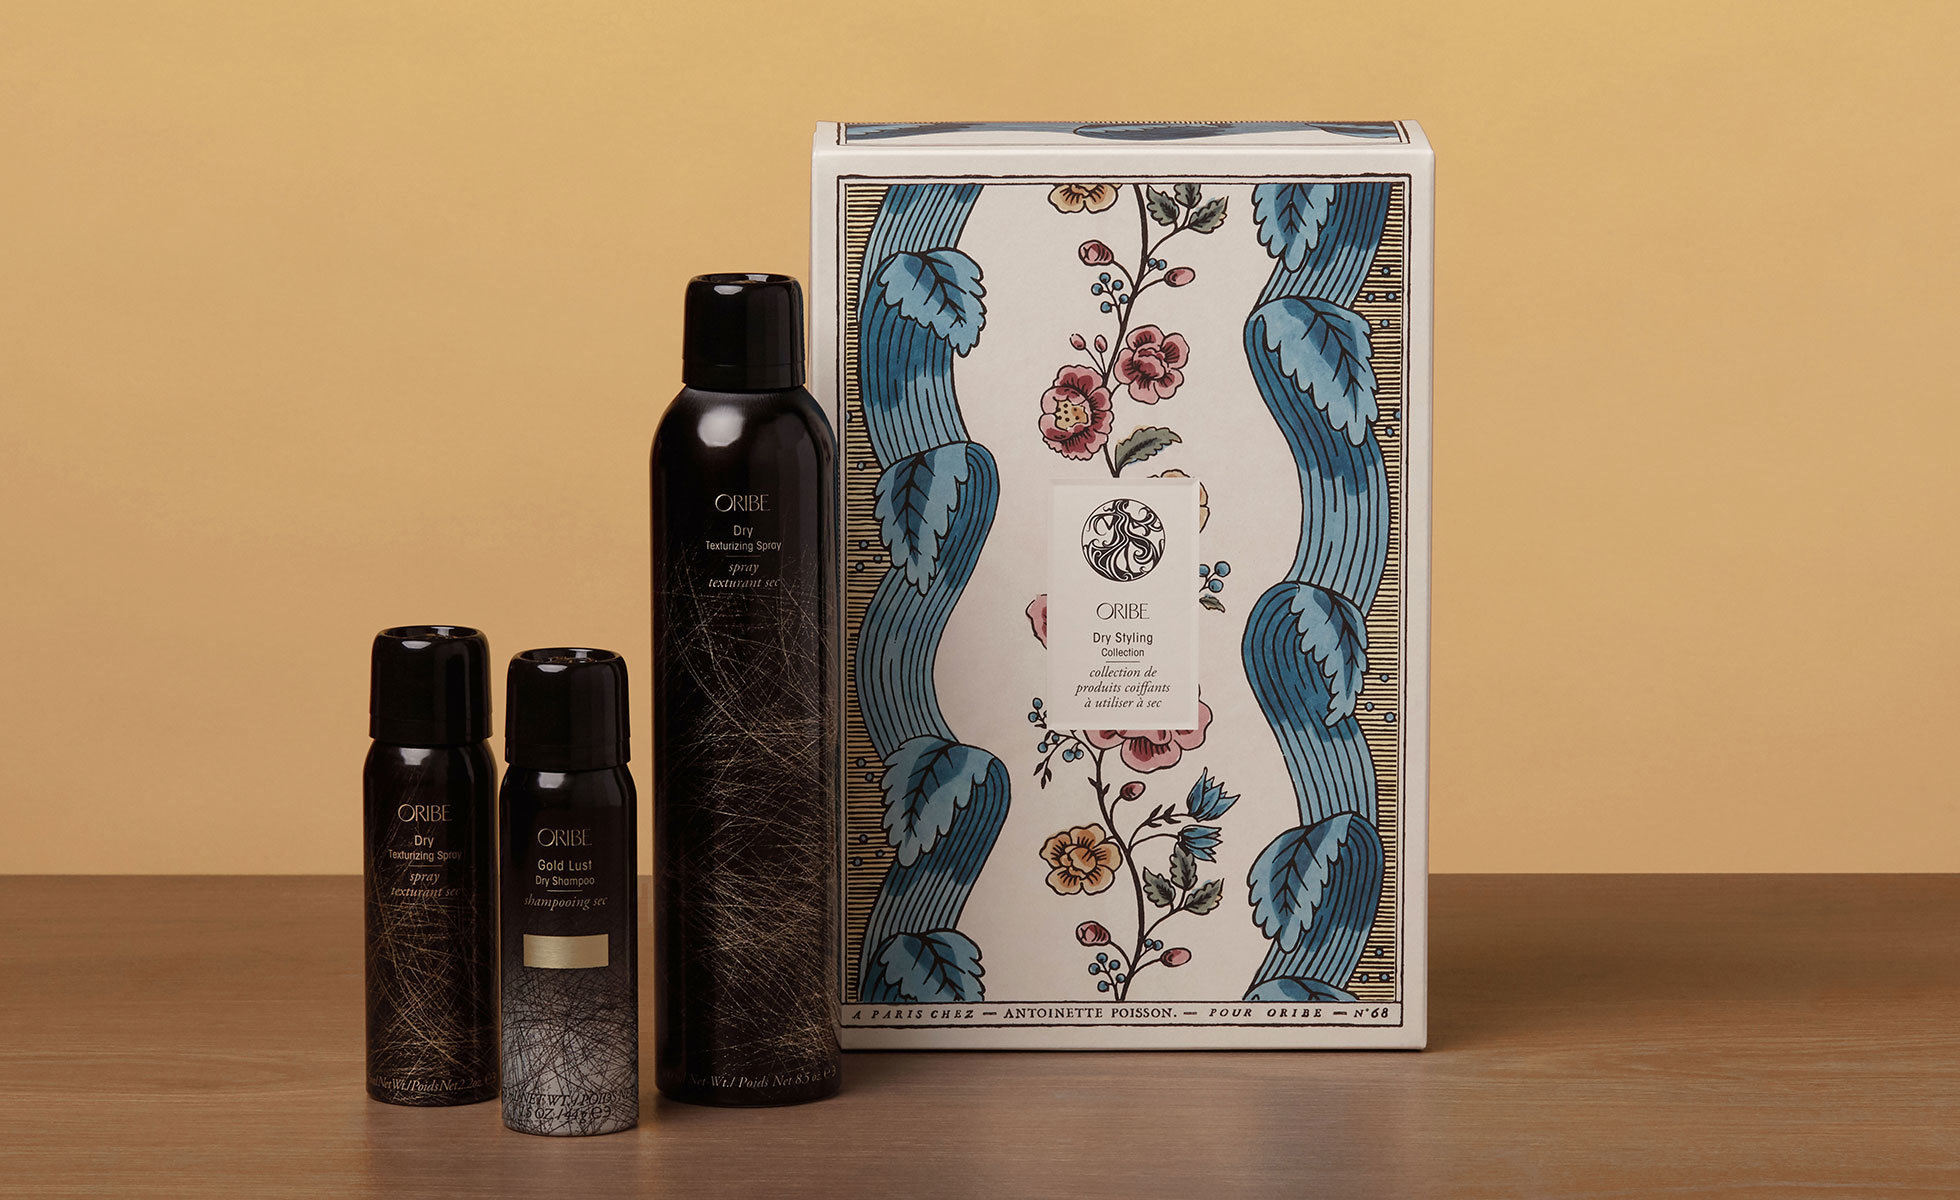 Oribe x Antoinette Poisson Dry Styling Collection